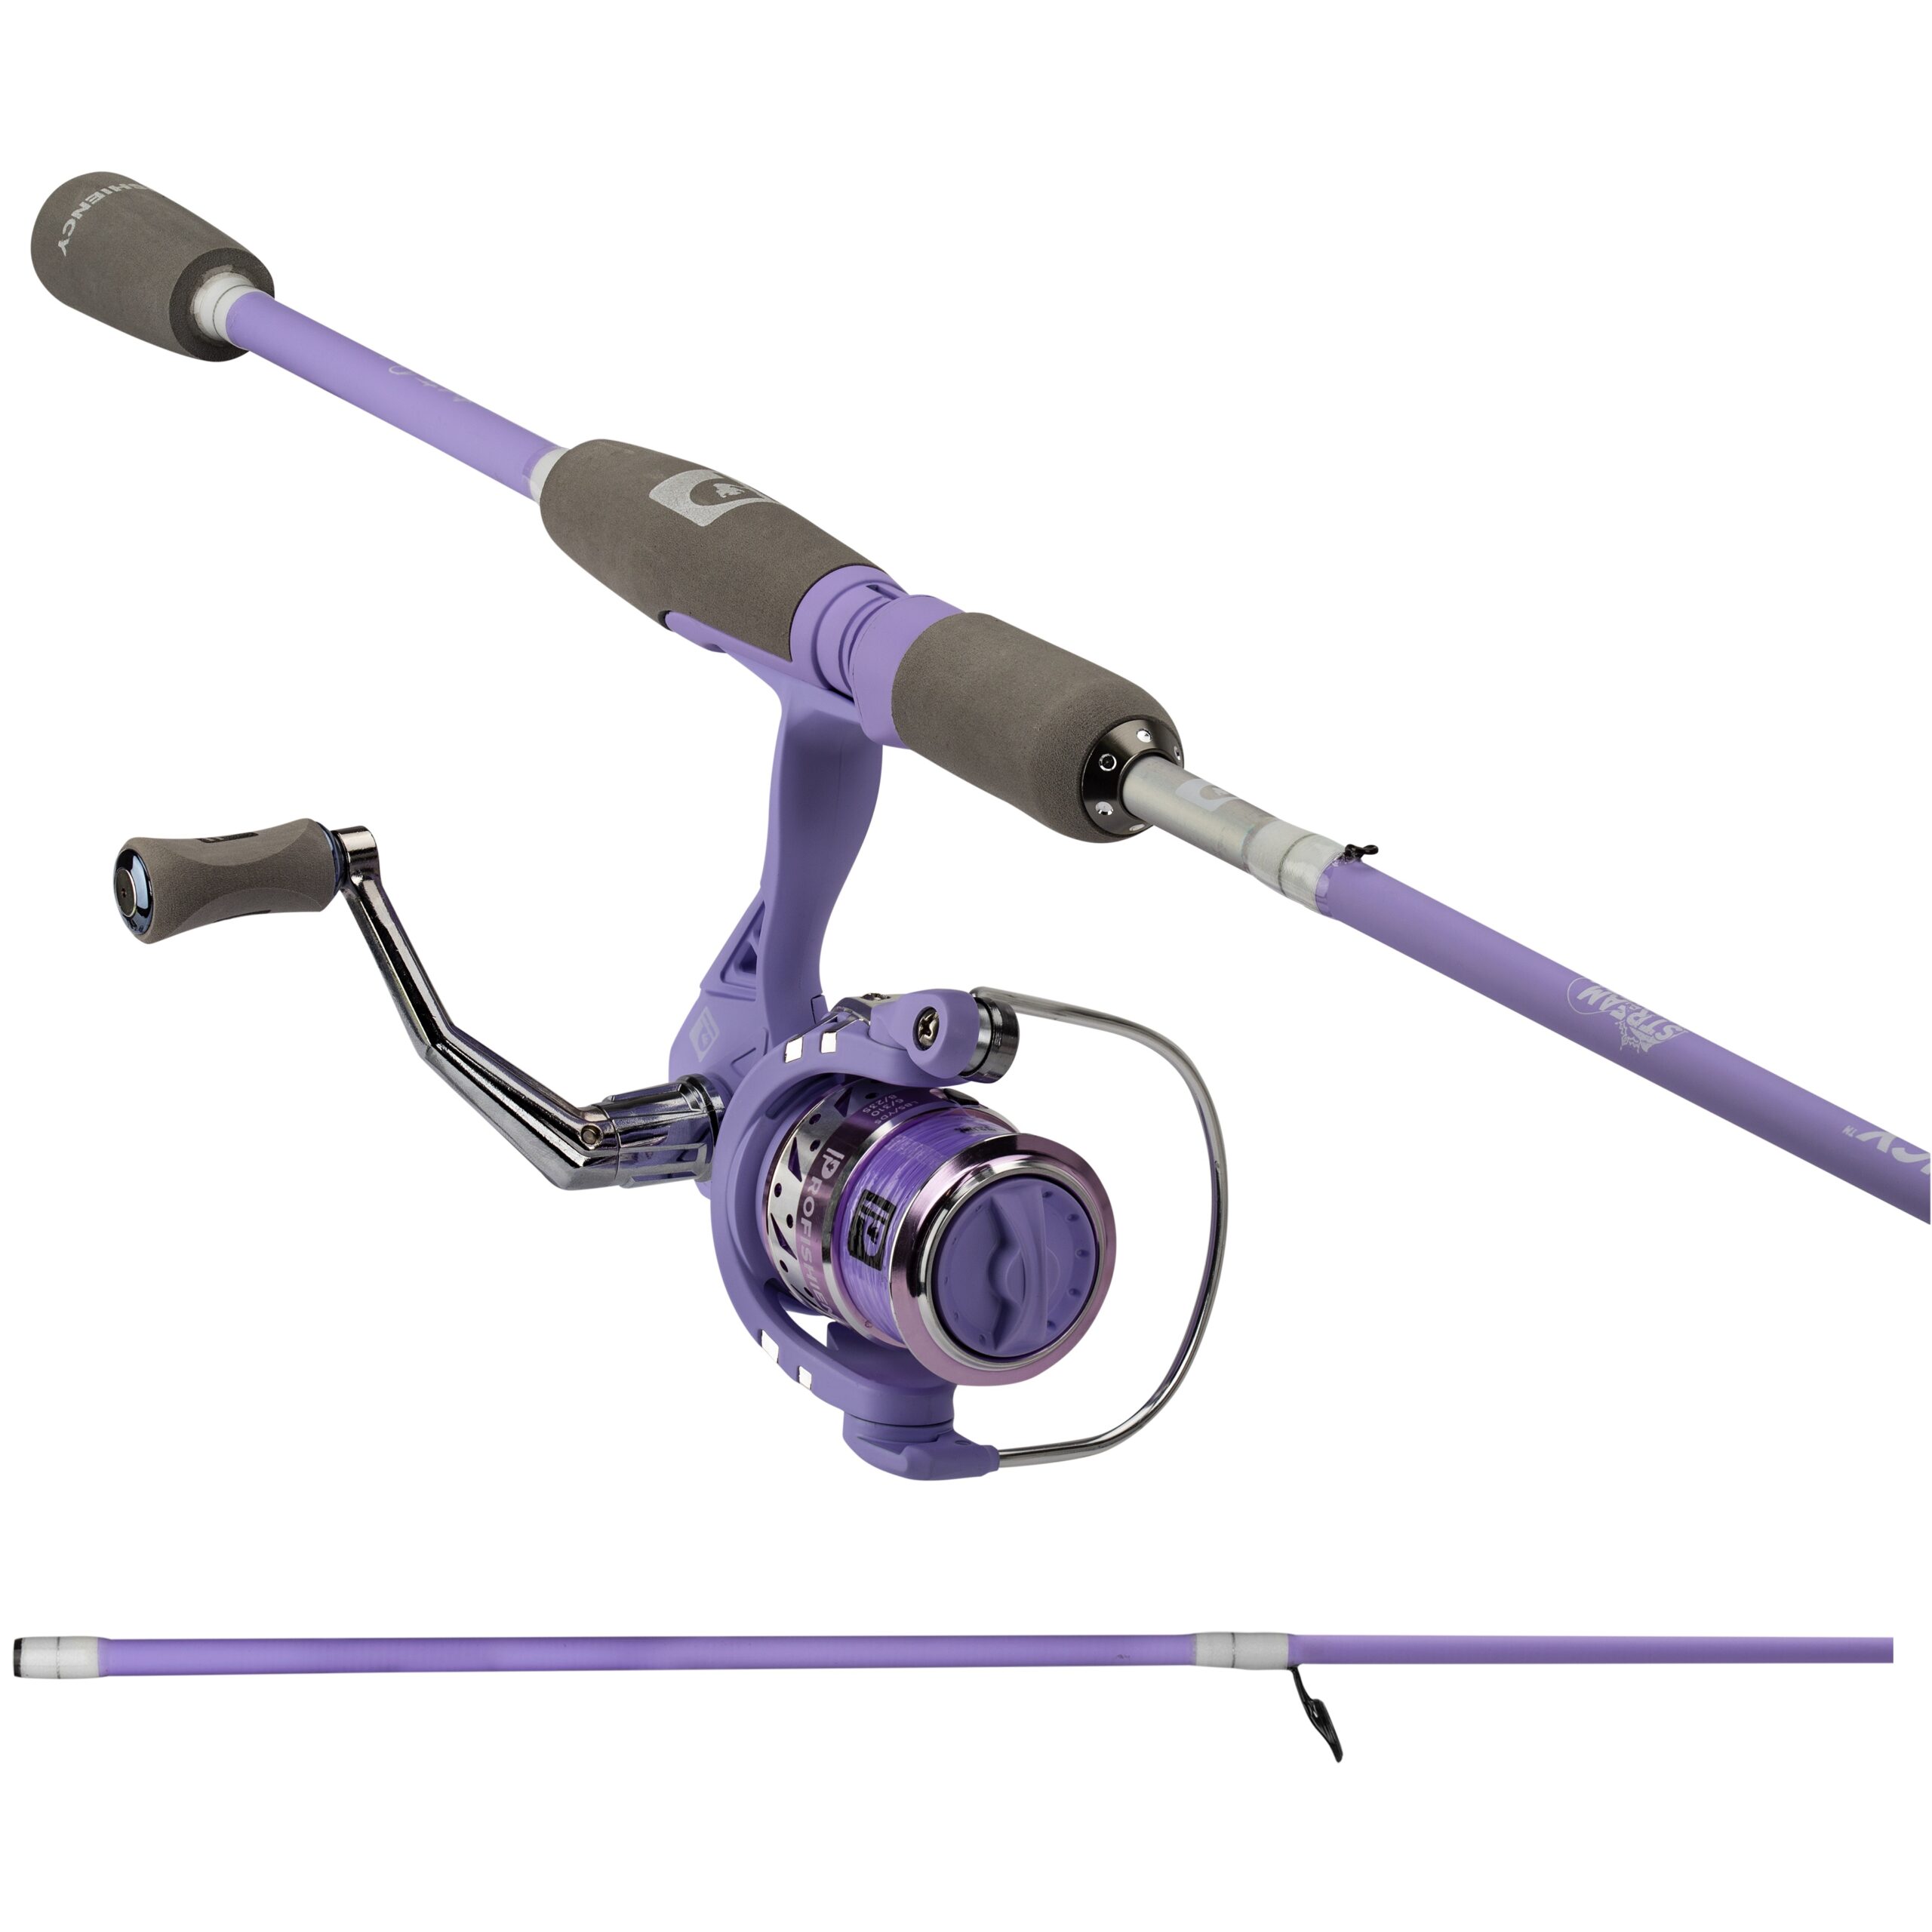 Profishiency Krazy 3 Micro Spinning Rod and Reel Combo - 5ft 8in, Medium  Light Power, 2pc